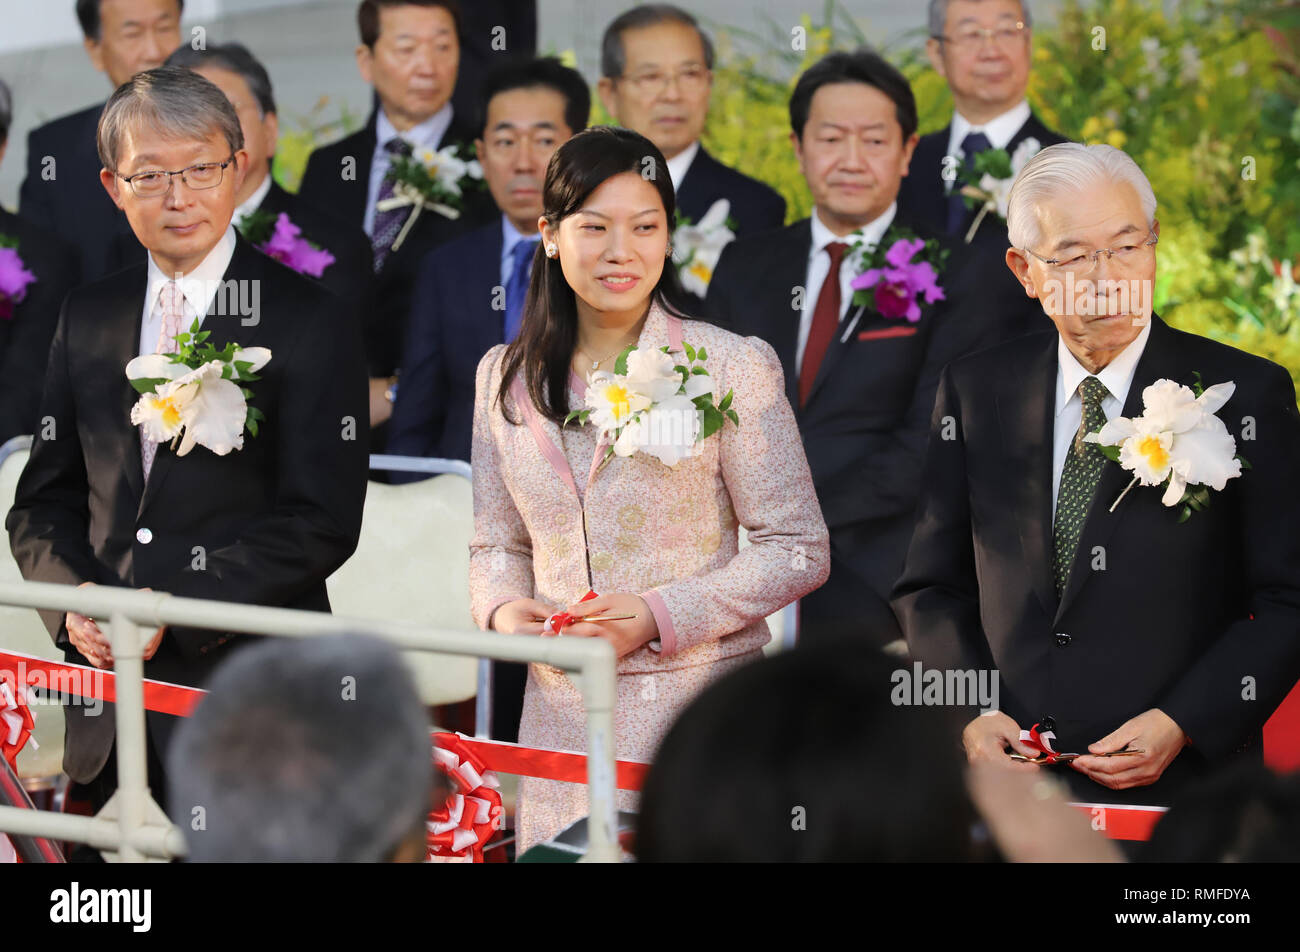 Tokyo, Japan. 15th Feb, 2019. Noriko Senge (C), the second daughter of Princess Takamado, accompanied by Yomiuri Shimbun Holdings chairman Kojiro Shiraishi (R) and Yomiuri president Toshikazu Yamaguchi (L) cuts a ribbon at the opening ceremony for 'JGP International Orchid and Flower Show' at the Tokyo Dome stadium in Tokyo on Friday, February 15, 2019. The annual flower festival with 3,000 types, 100,000 plants orchids will be held from February 15 through 22. Credit: Yoshio Tsunoda/AFLO/Alamy Live News Stock Photo